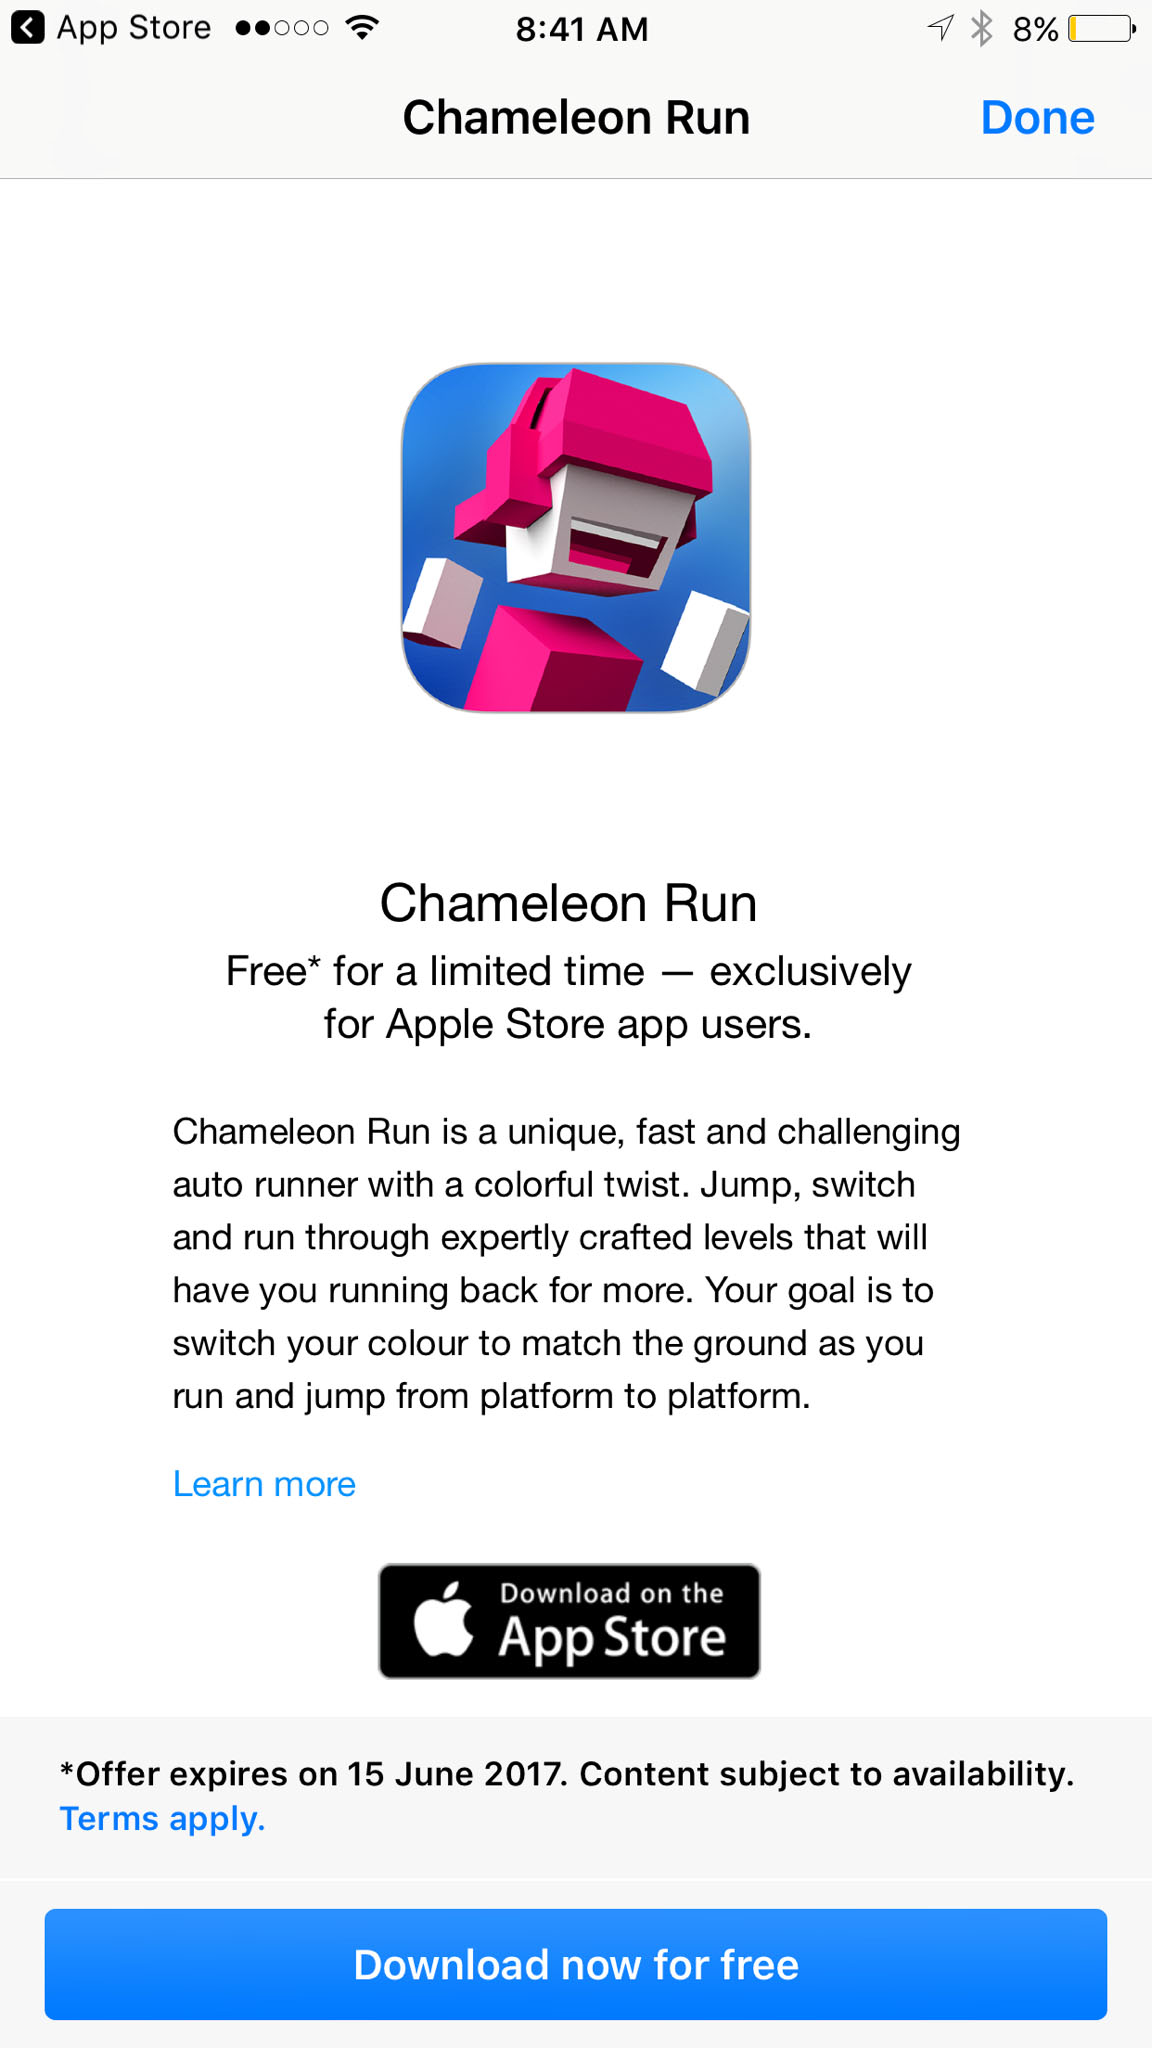 Apple Offers Chameleon Run as a Free Download via the Apple Store App